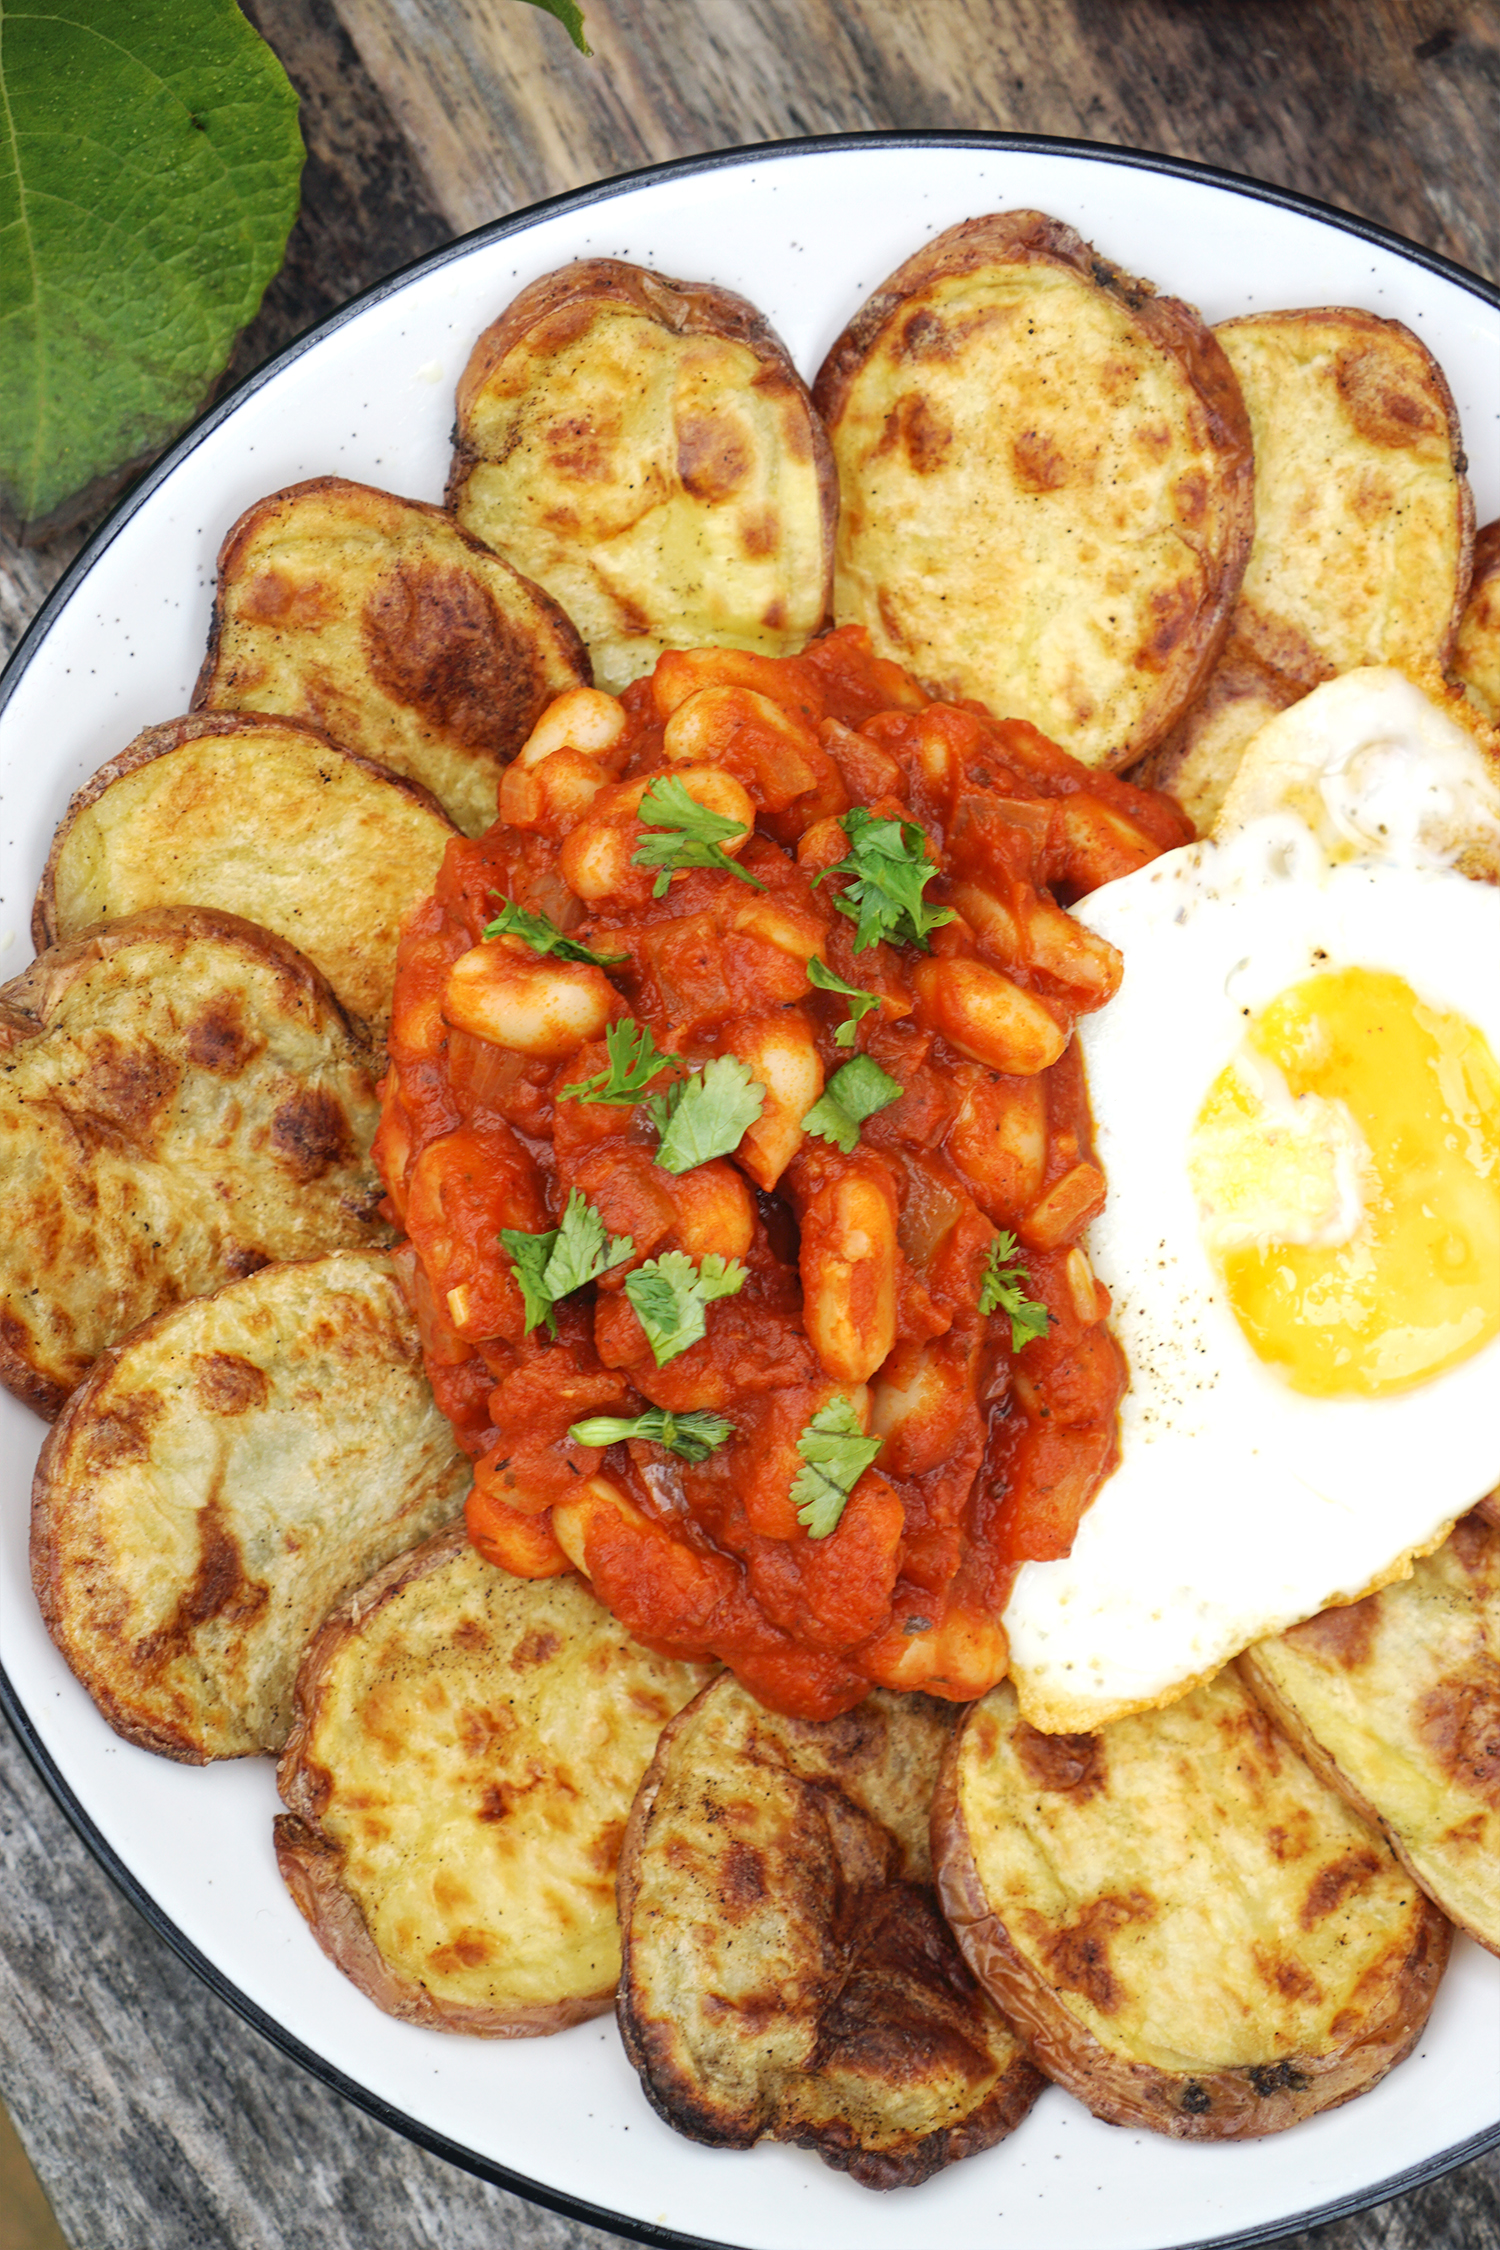 Homemade baked beans / white beans in tomato sauce served with cottage fried (baked potato slices) and a fried egg